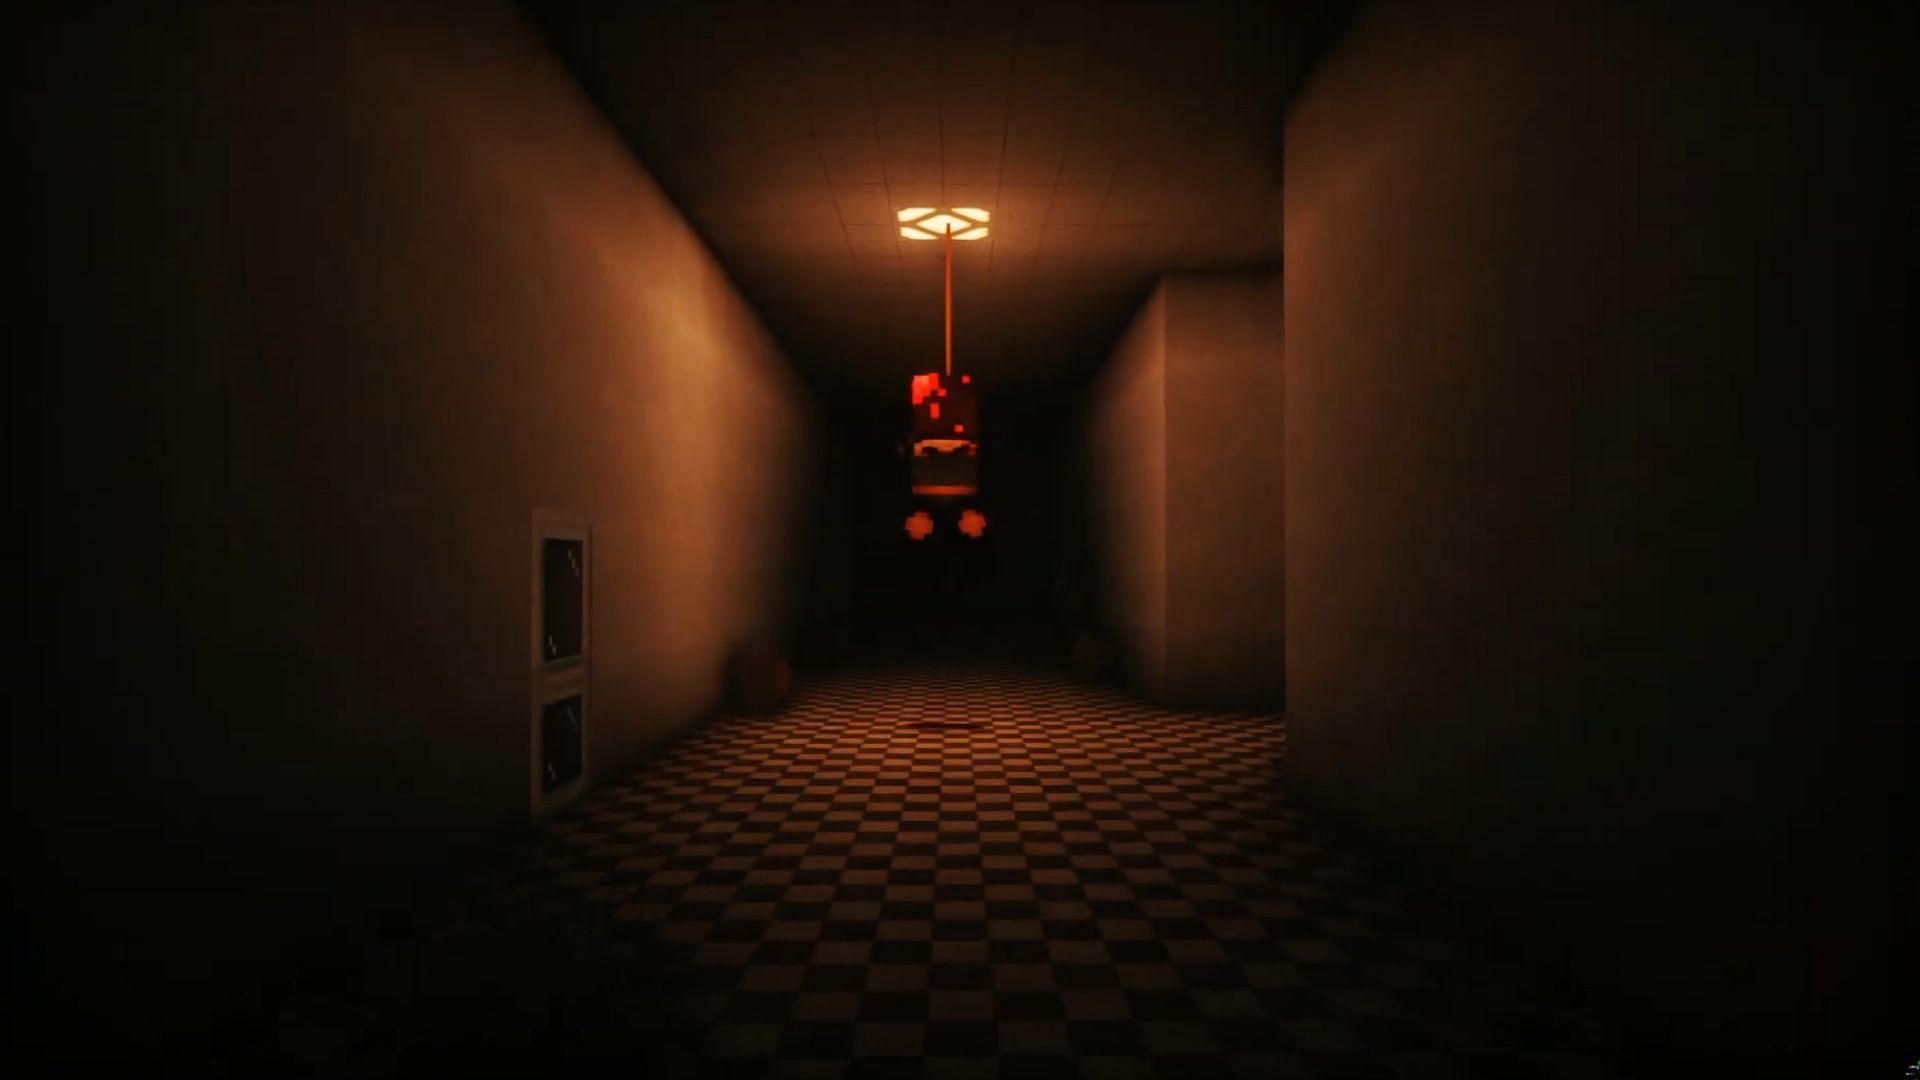 This map takes horror maps to another level through psychological effects (Image via minecraftmaps.com)